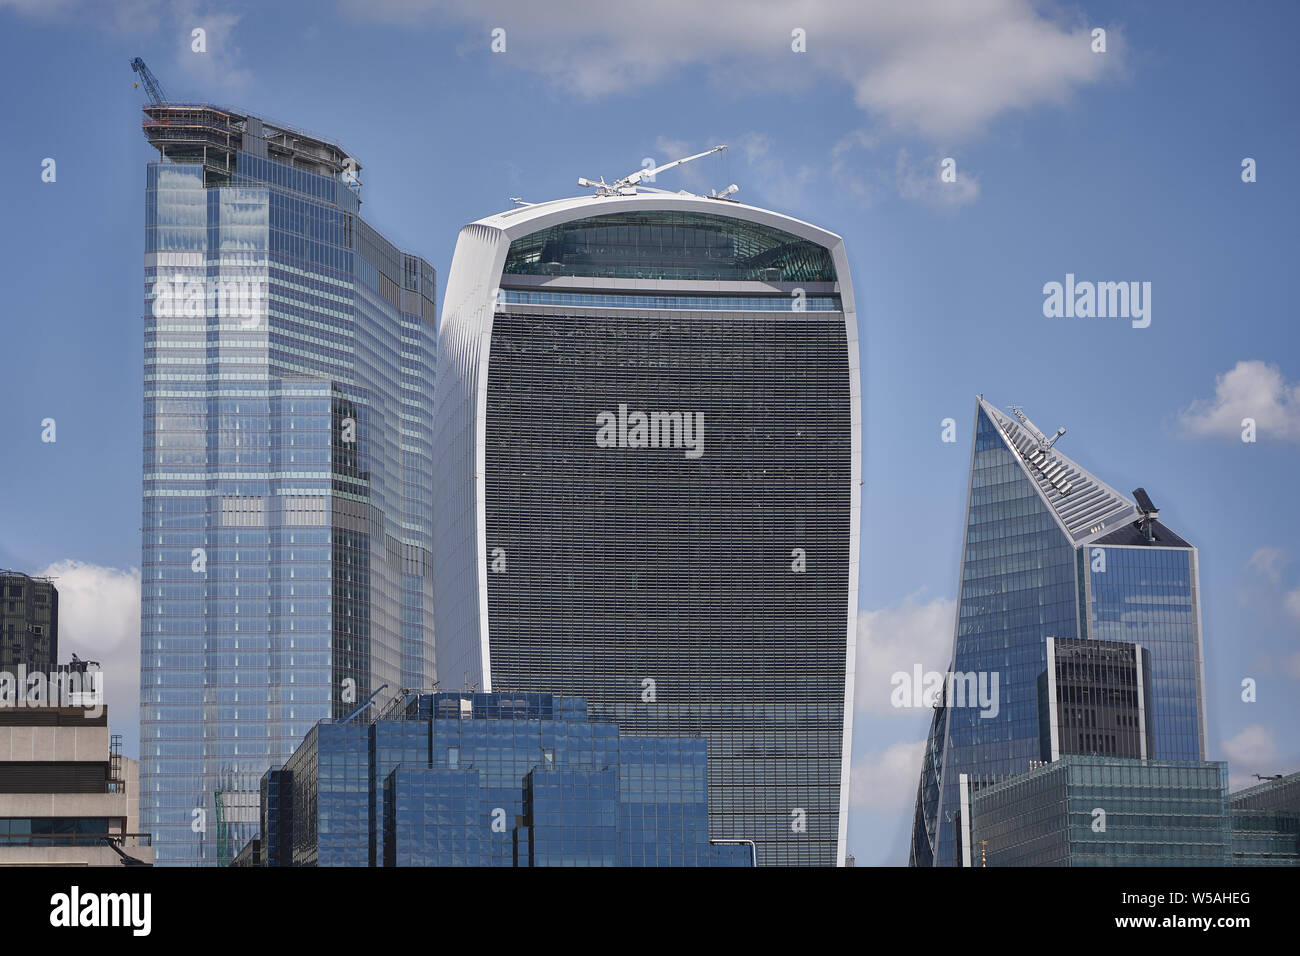 London, UK - July, 2019. View of the City of London, famous financial district, with new skyscrapers under construction. Stock Photo